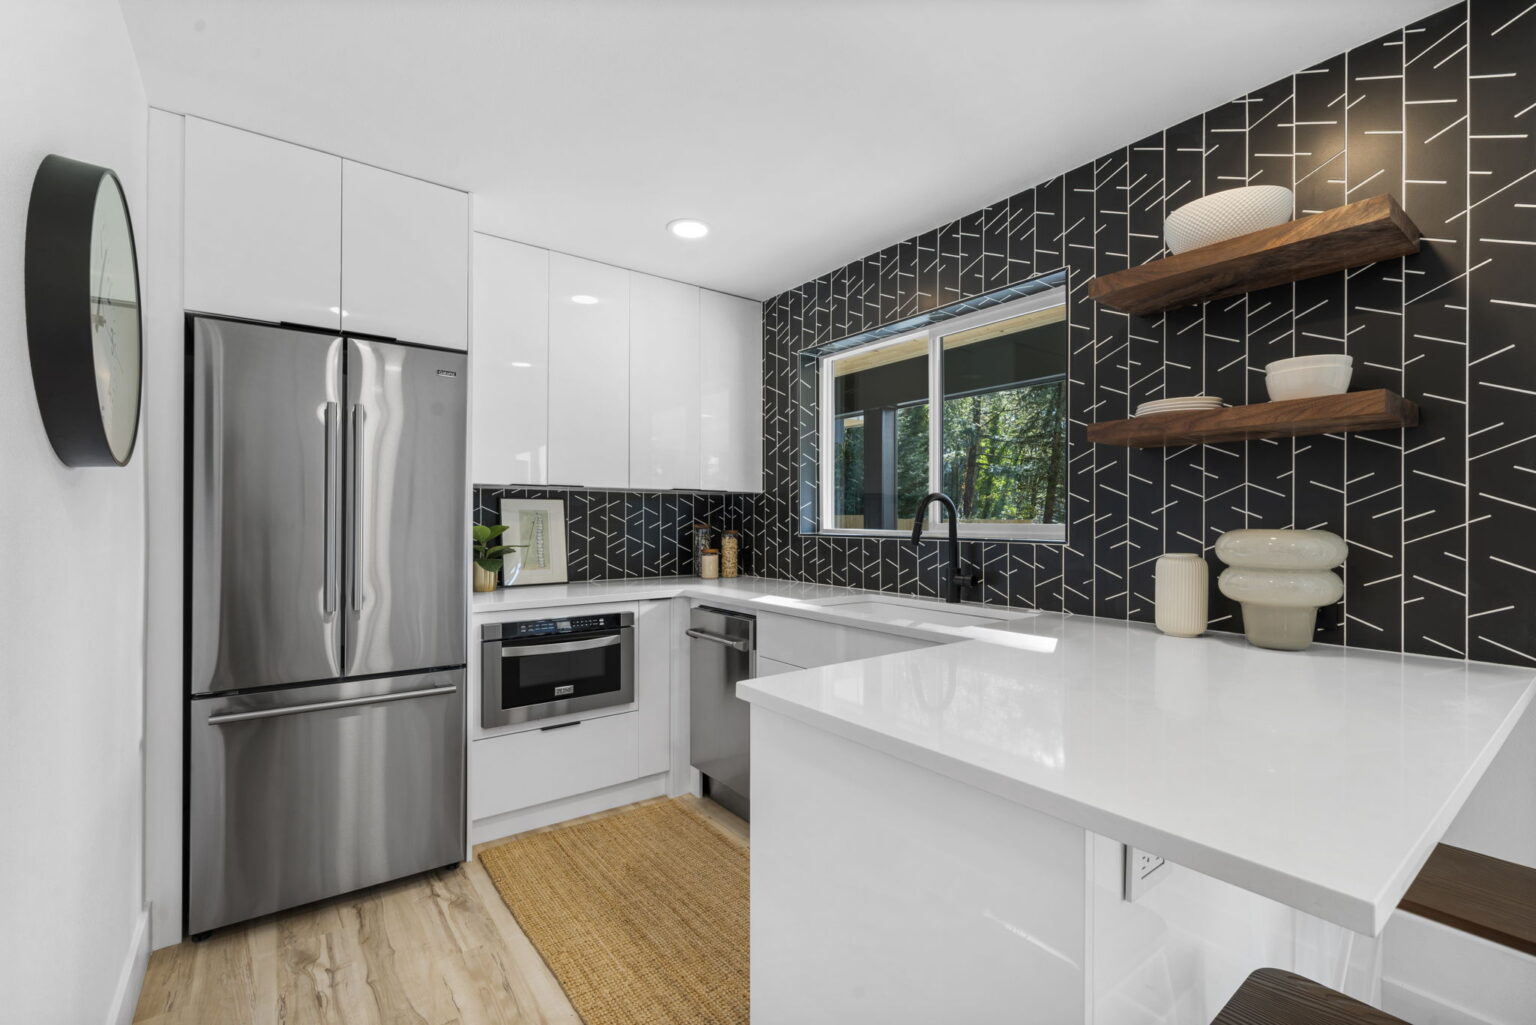 Photograph of beautiful, modern ADU kitchen remodel in Lake Oswego, Oregon by Anchor Vista Homes.